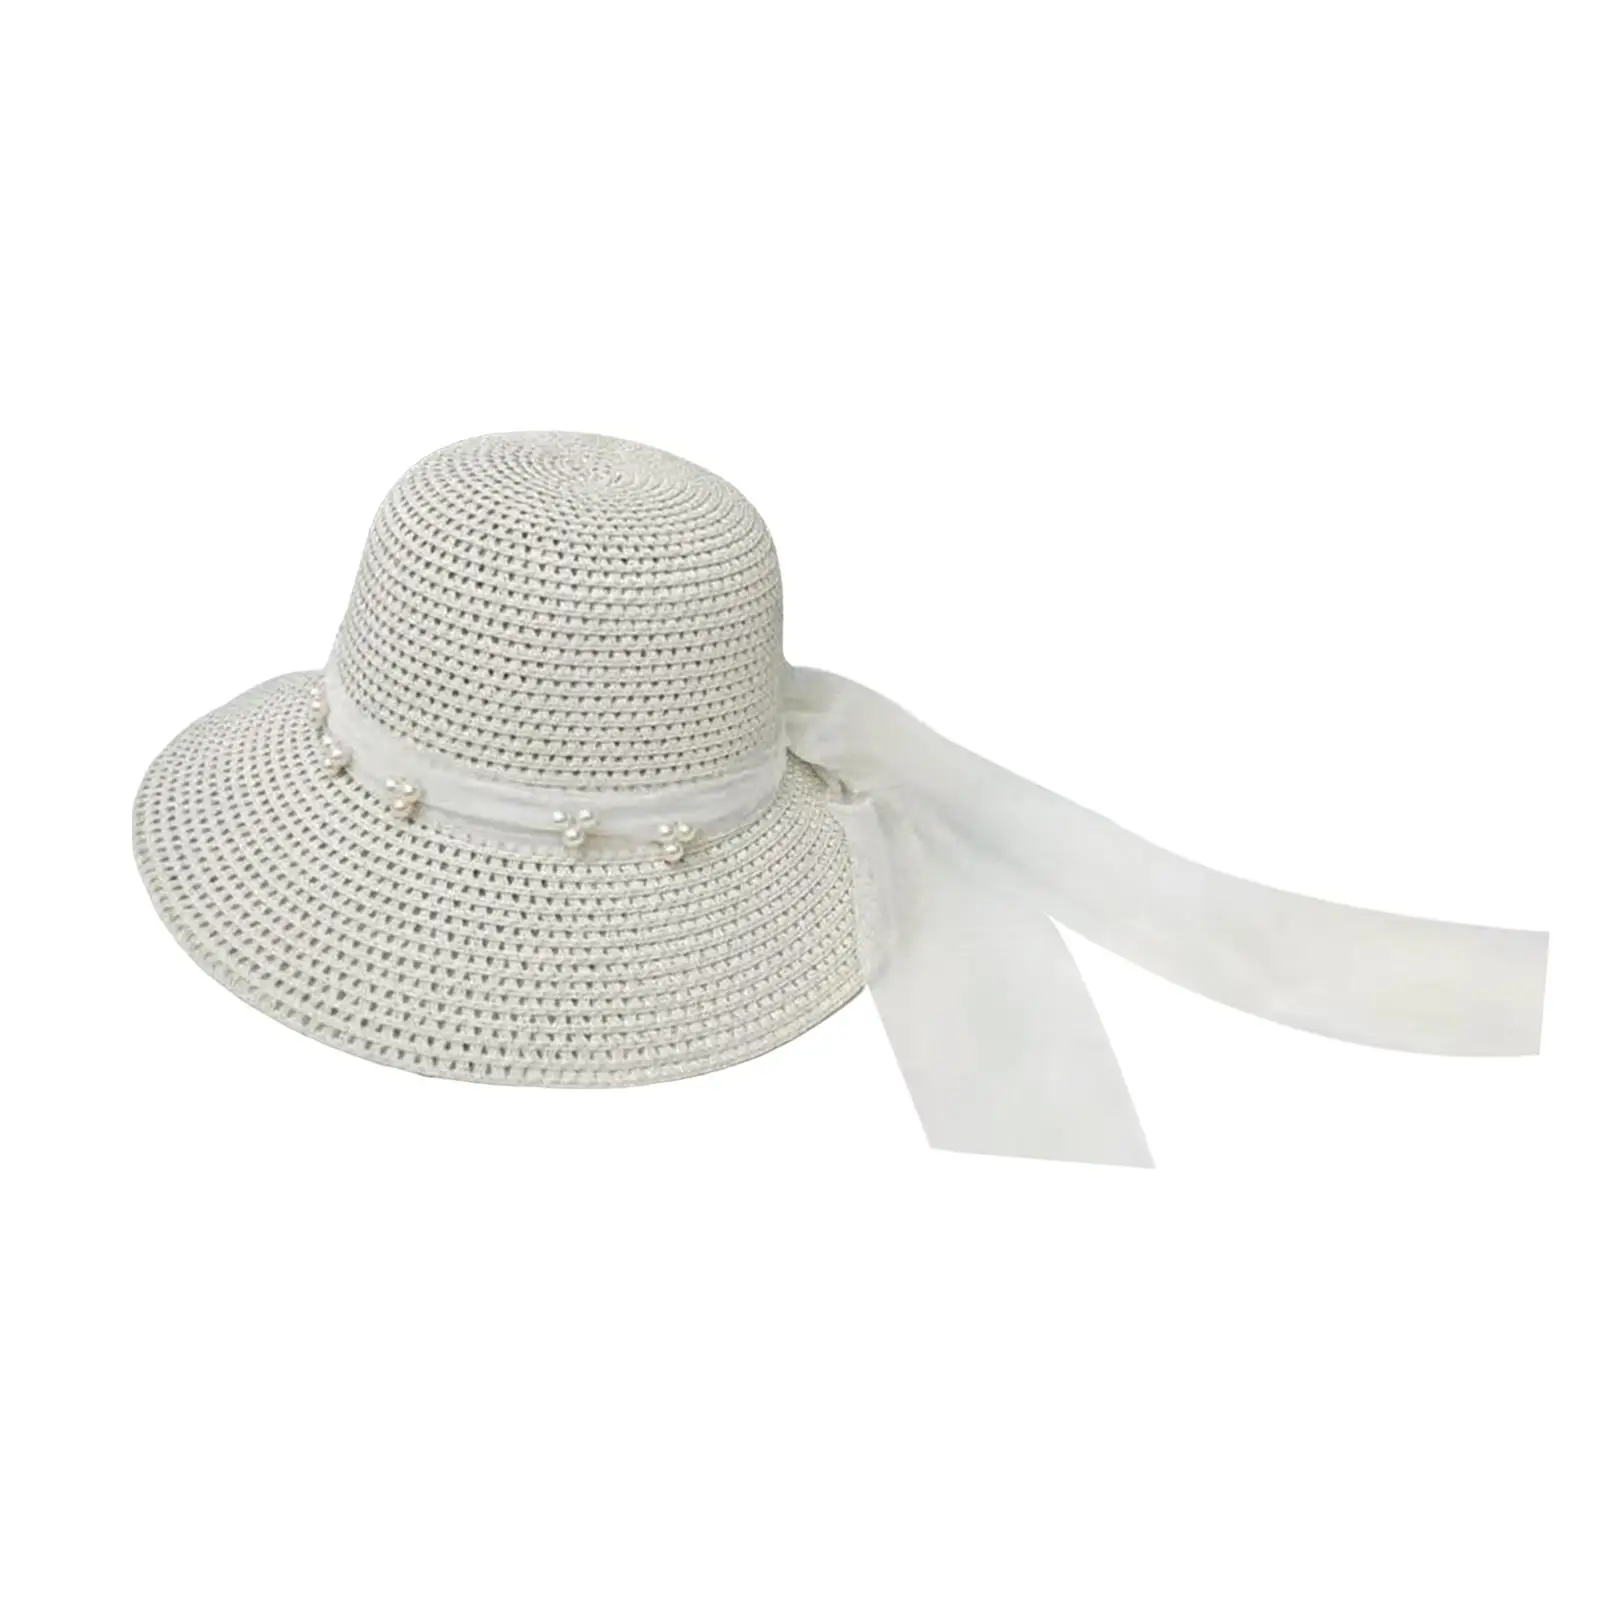 Womens Straw Hats Summer Beach Hat Breathable Ladies Fashion Packable Wide Brim Visor Hats for Festival Vacation Travel Outdoor